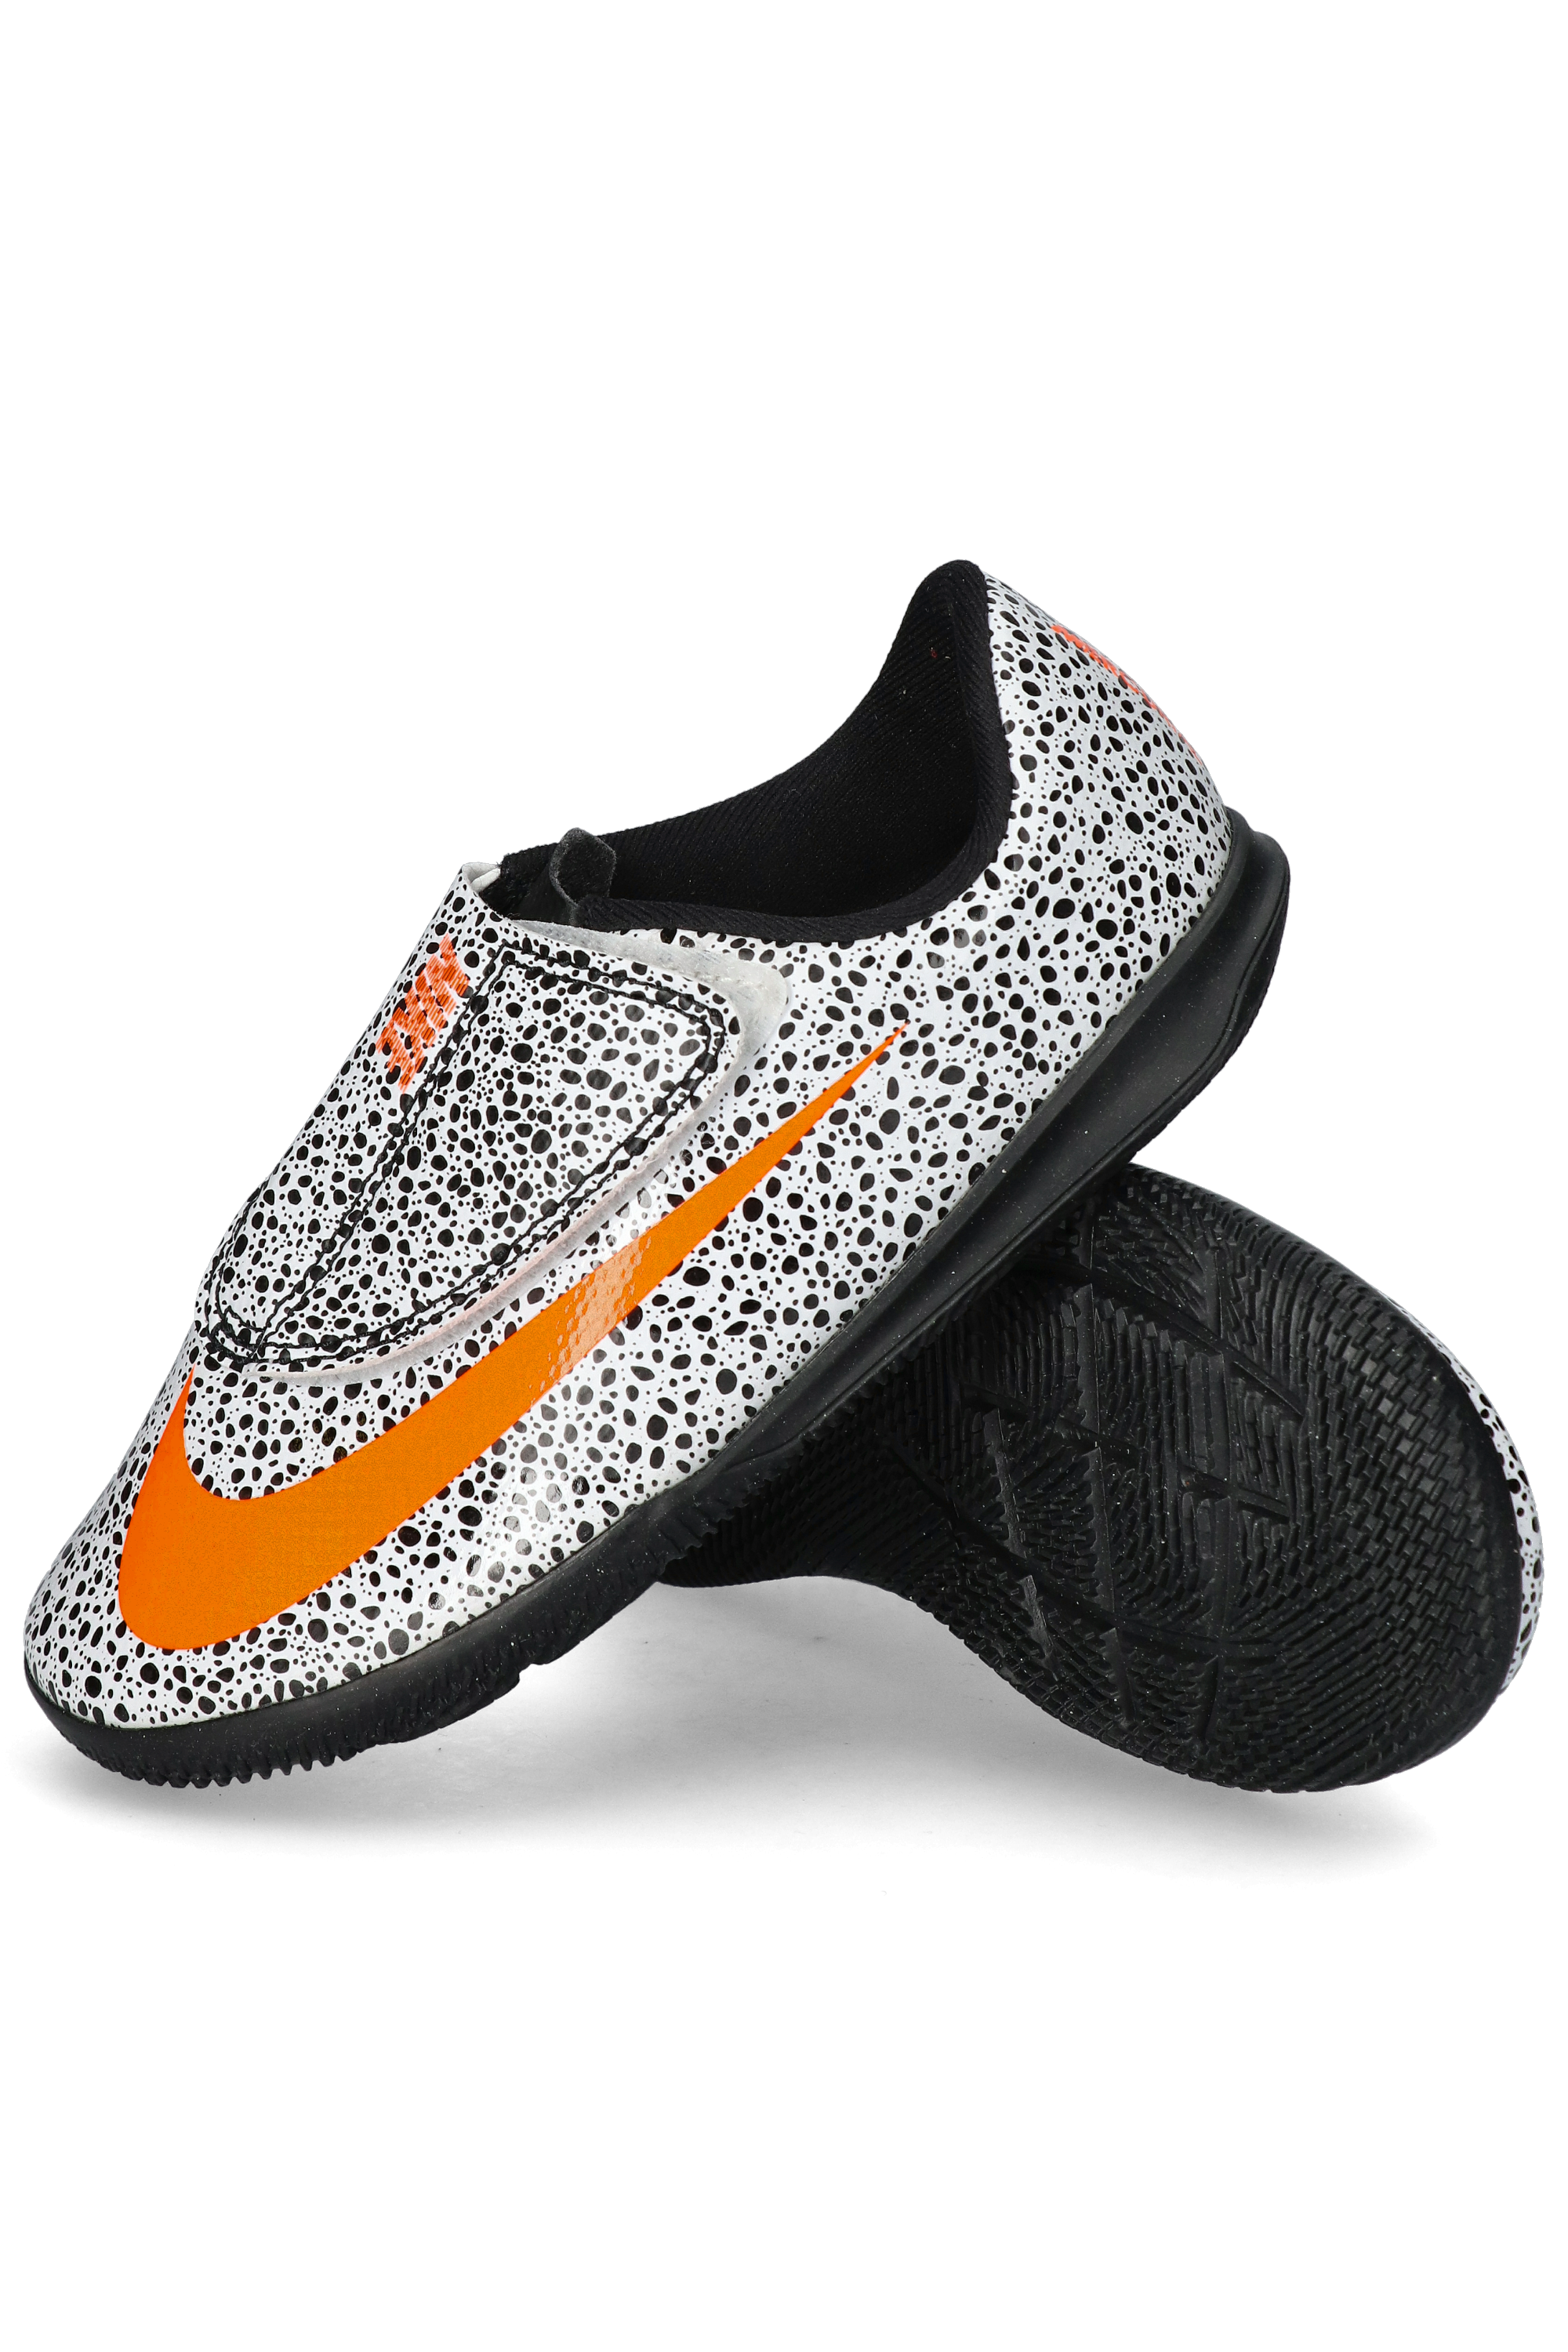 Buy Nike Mercurial Vapor 13 Academy MG Only $ 56 Today.